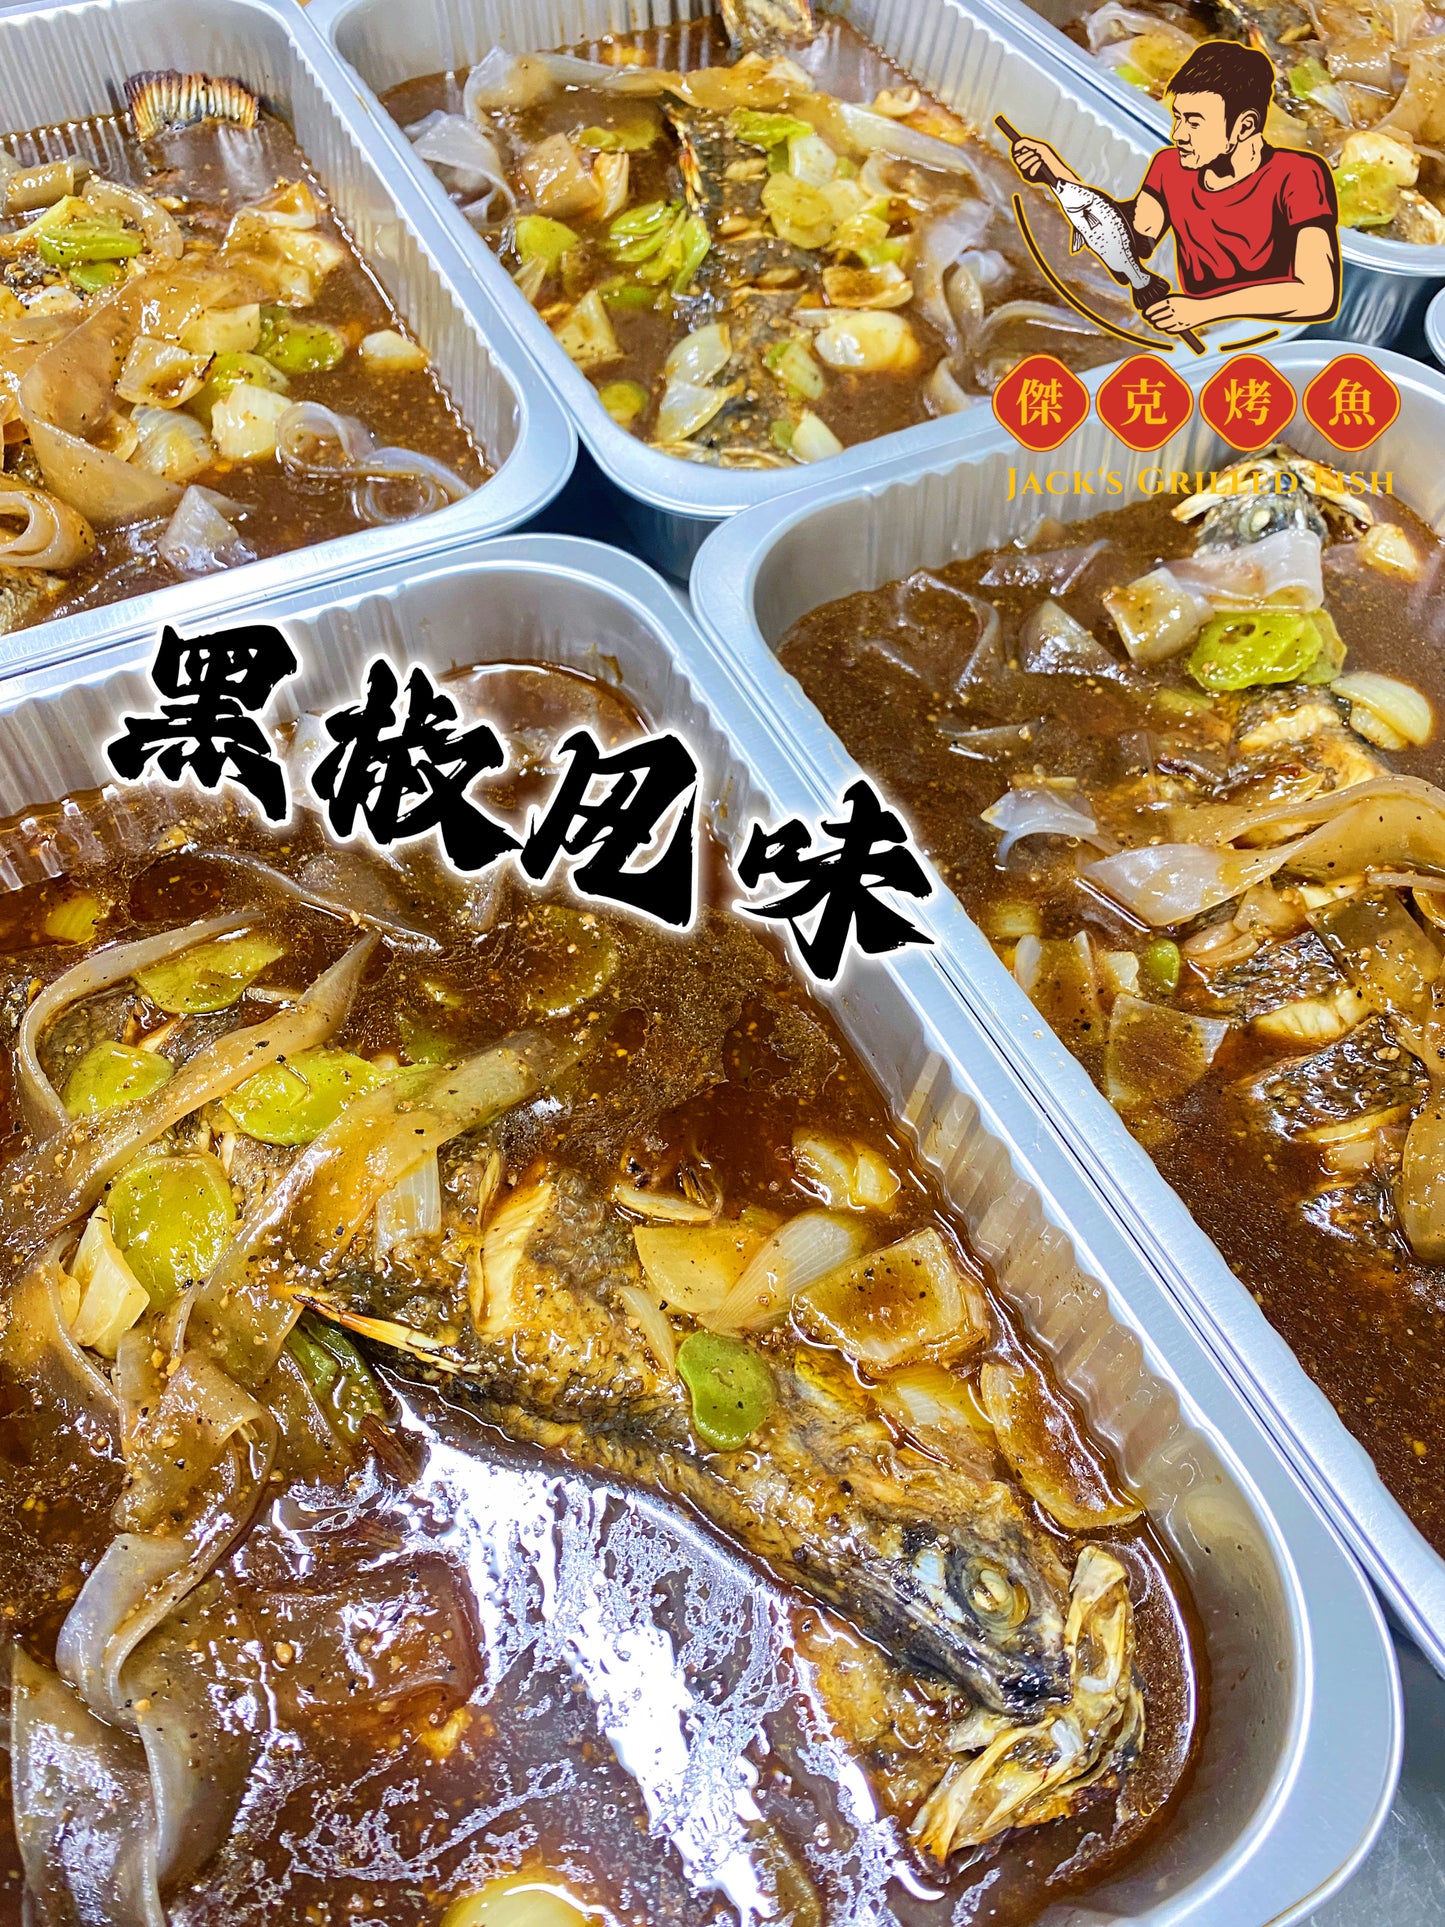 Jack's Grilled Live Fish 【杰克烤鱼】(cooked)